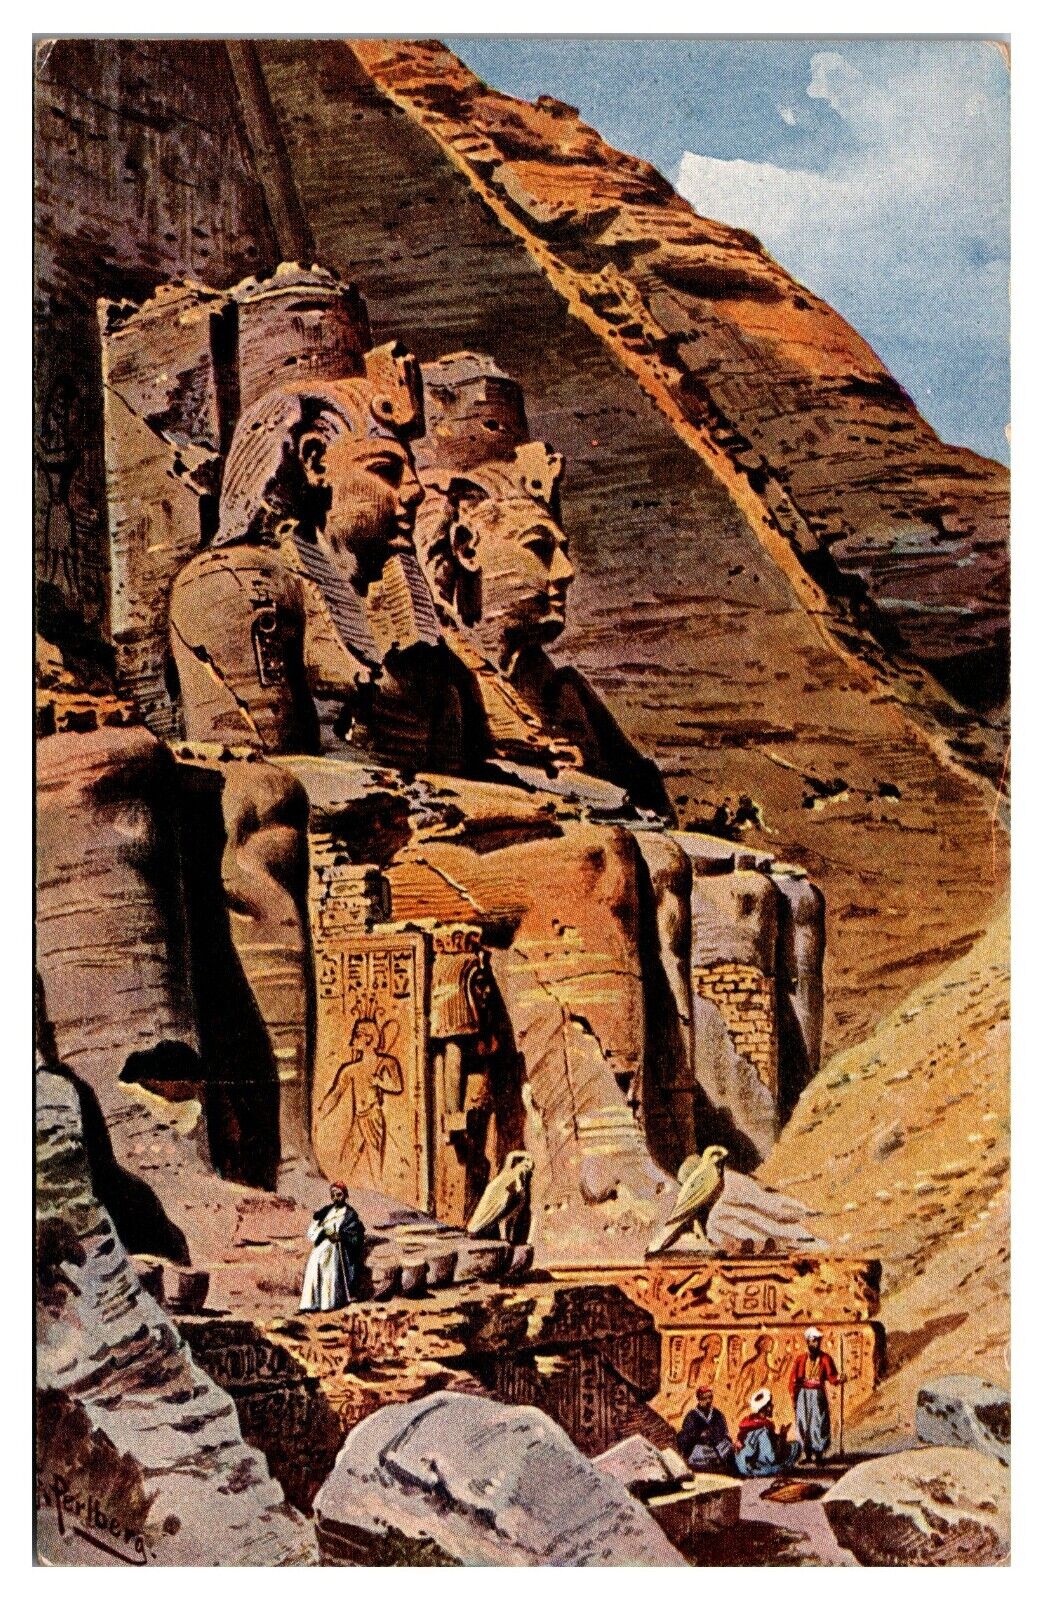 ANTQ The Colossi of Ramses in Abu-Simbel, Egypt Postcard